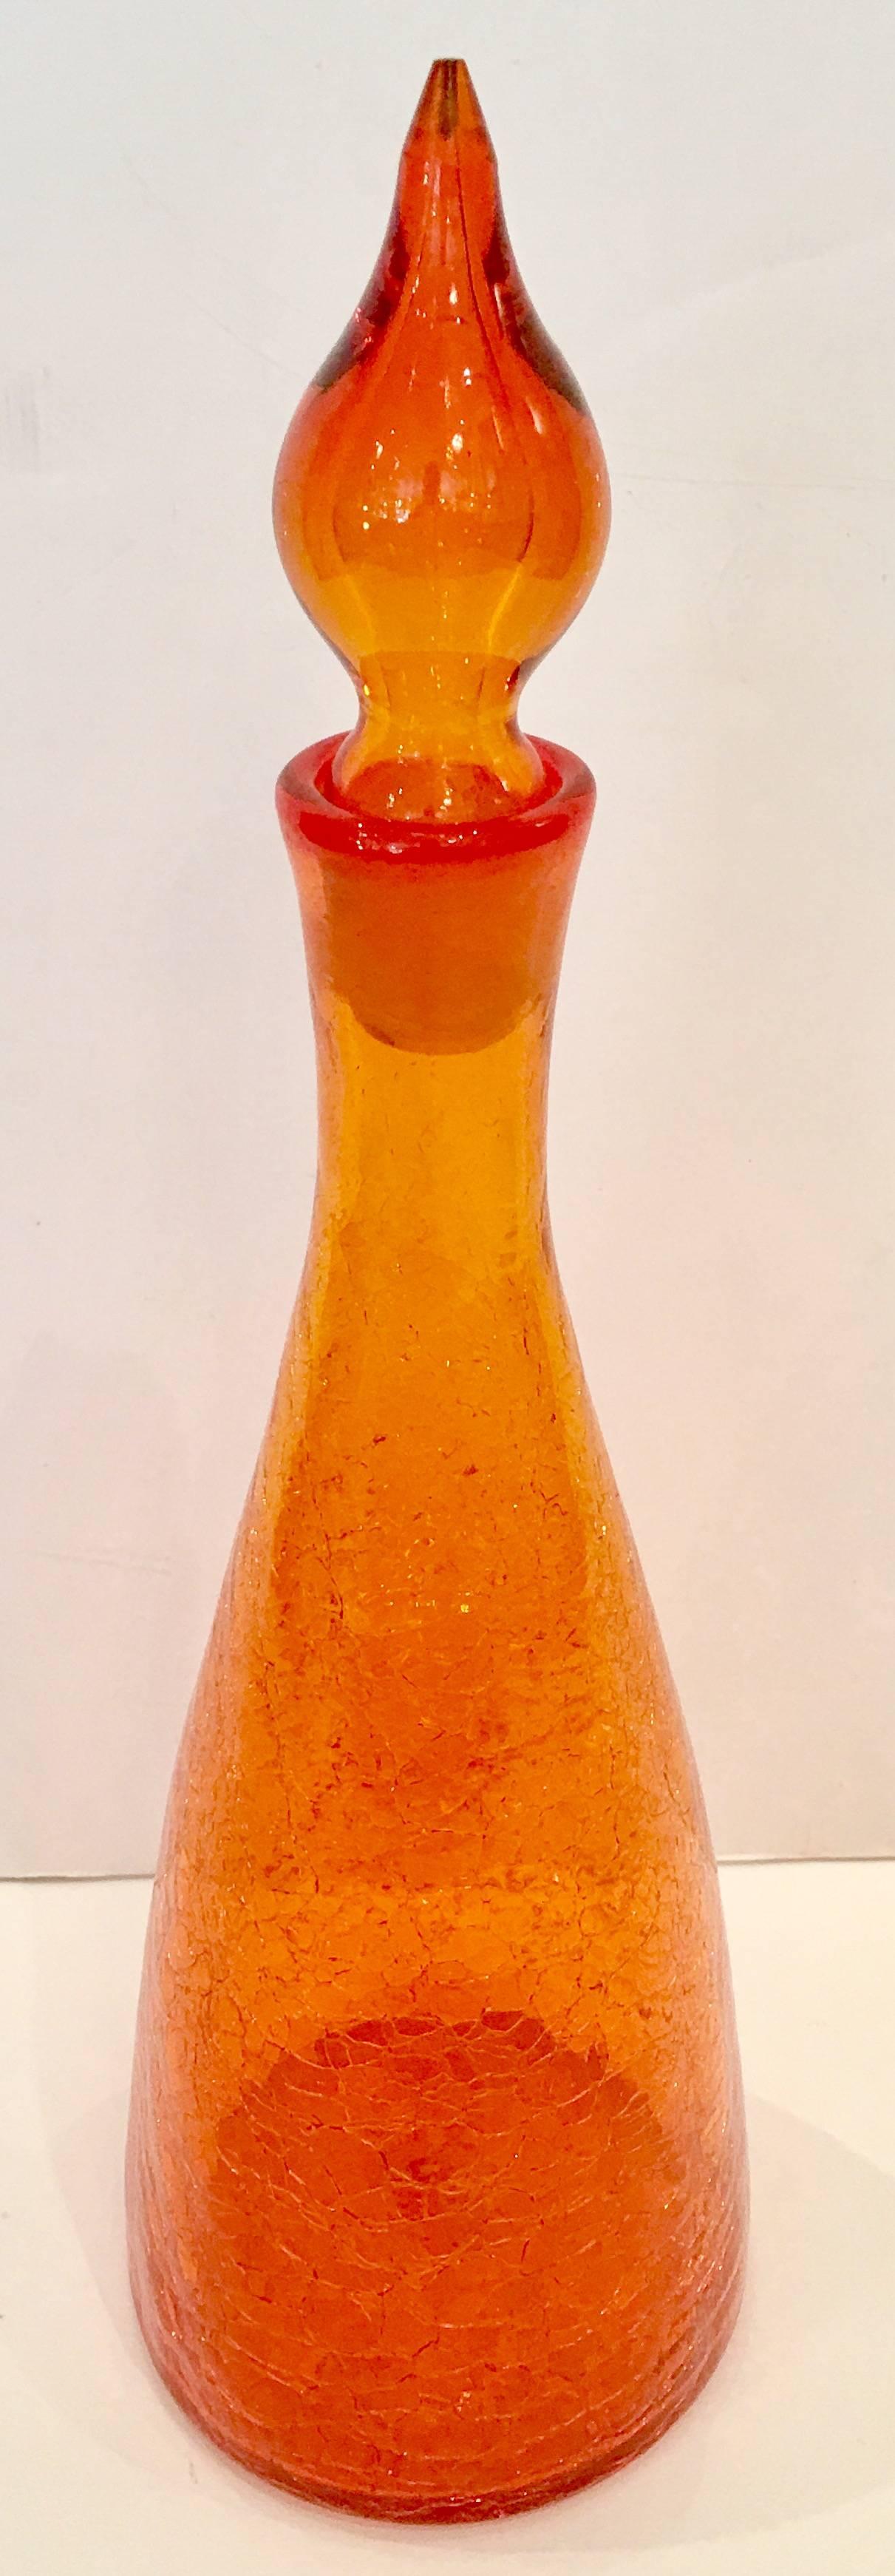 1950'S Blenko tangerine crackle glass decanter with stopper designed by Winslow Anderson.